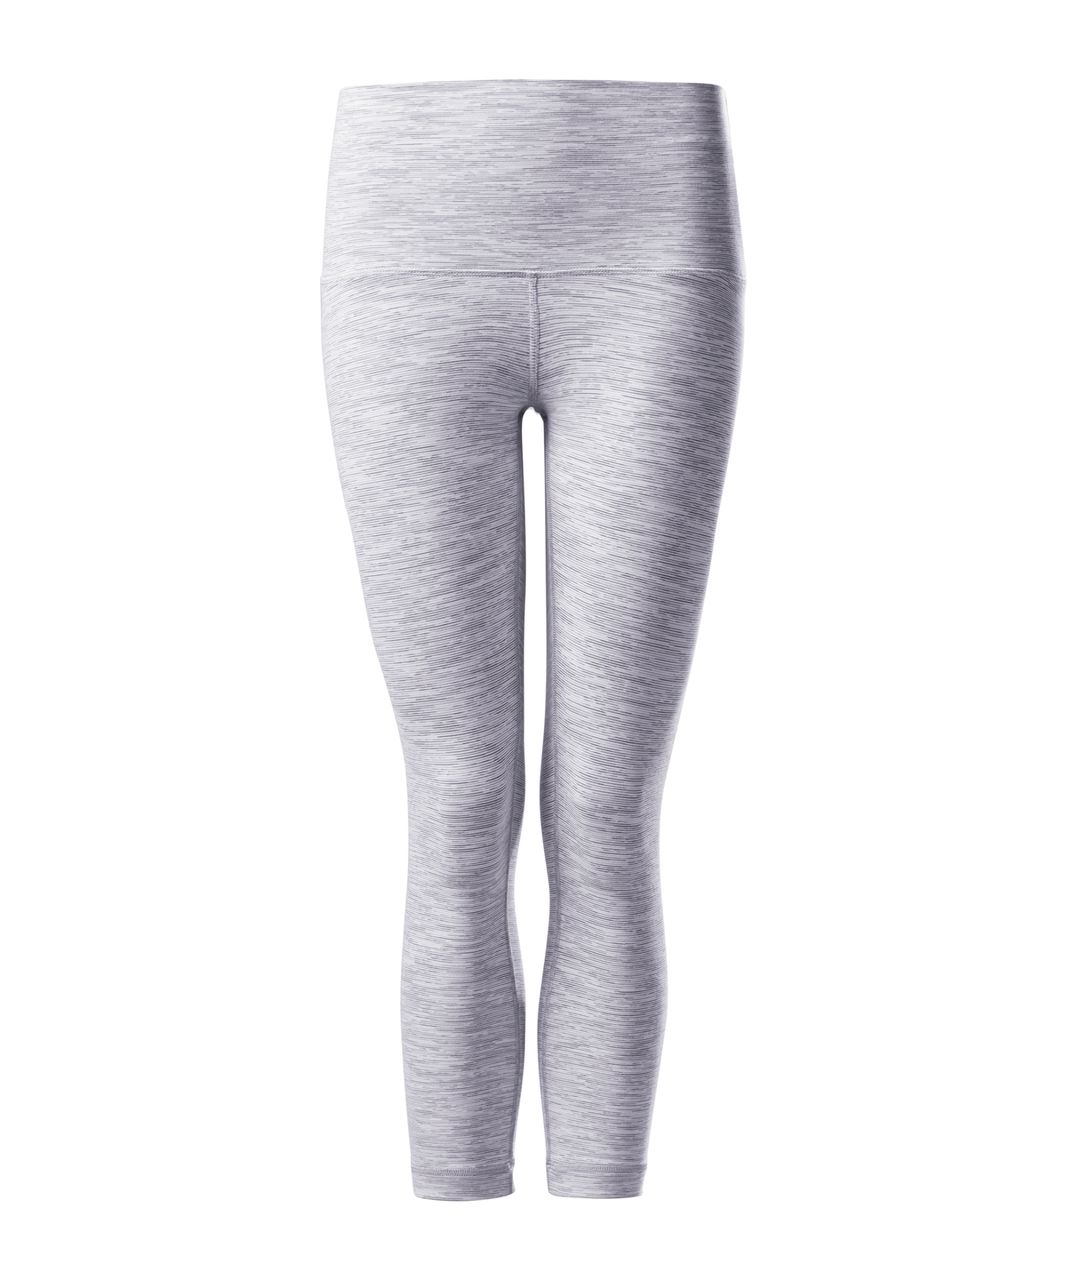 Lululemon Wunder Under Leggings US 6 Wee Are From Space Ice Grey Alpine  White, Women's Fashion, Activewear on Carousell